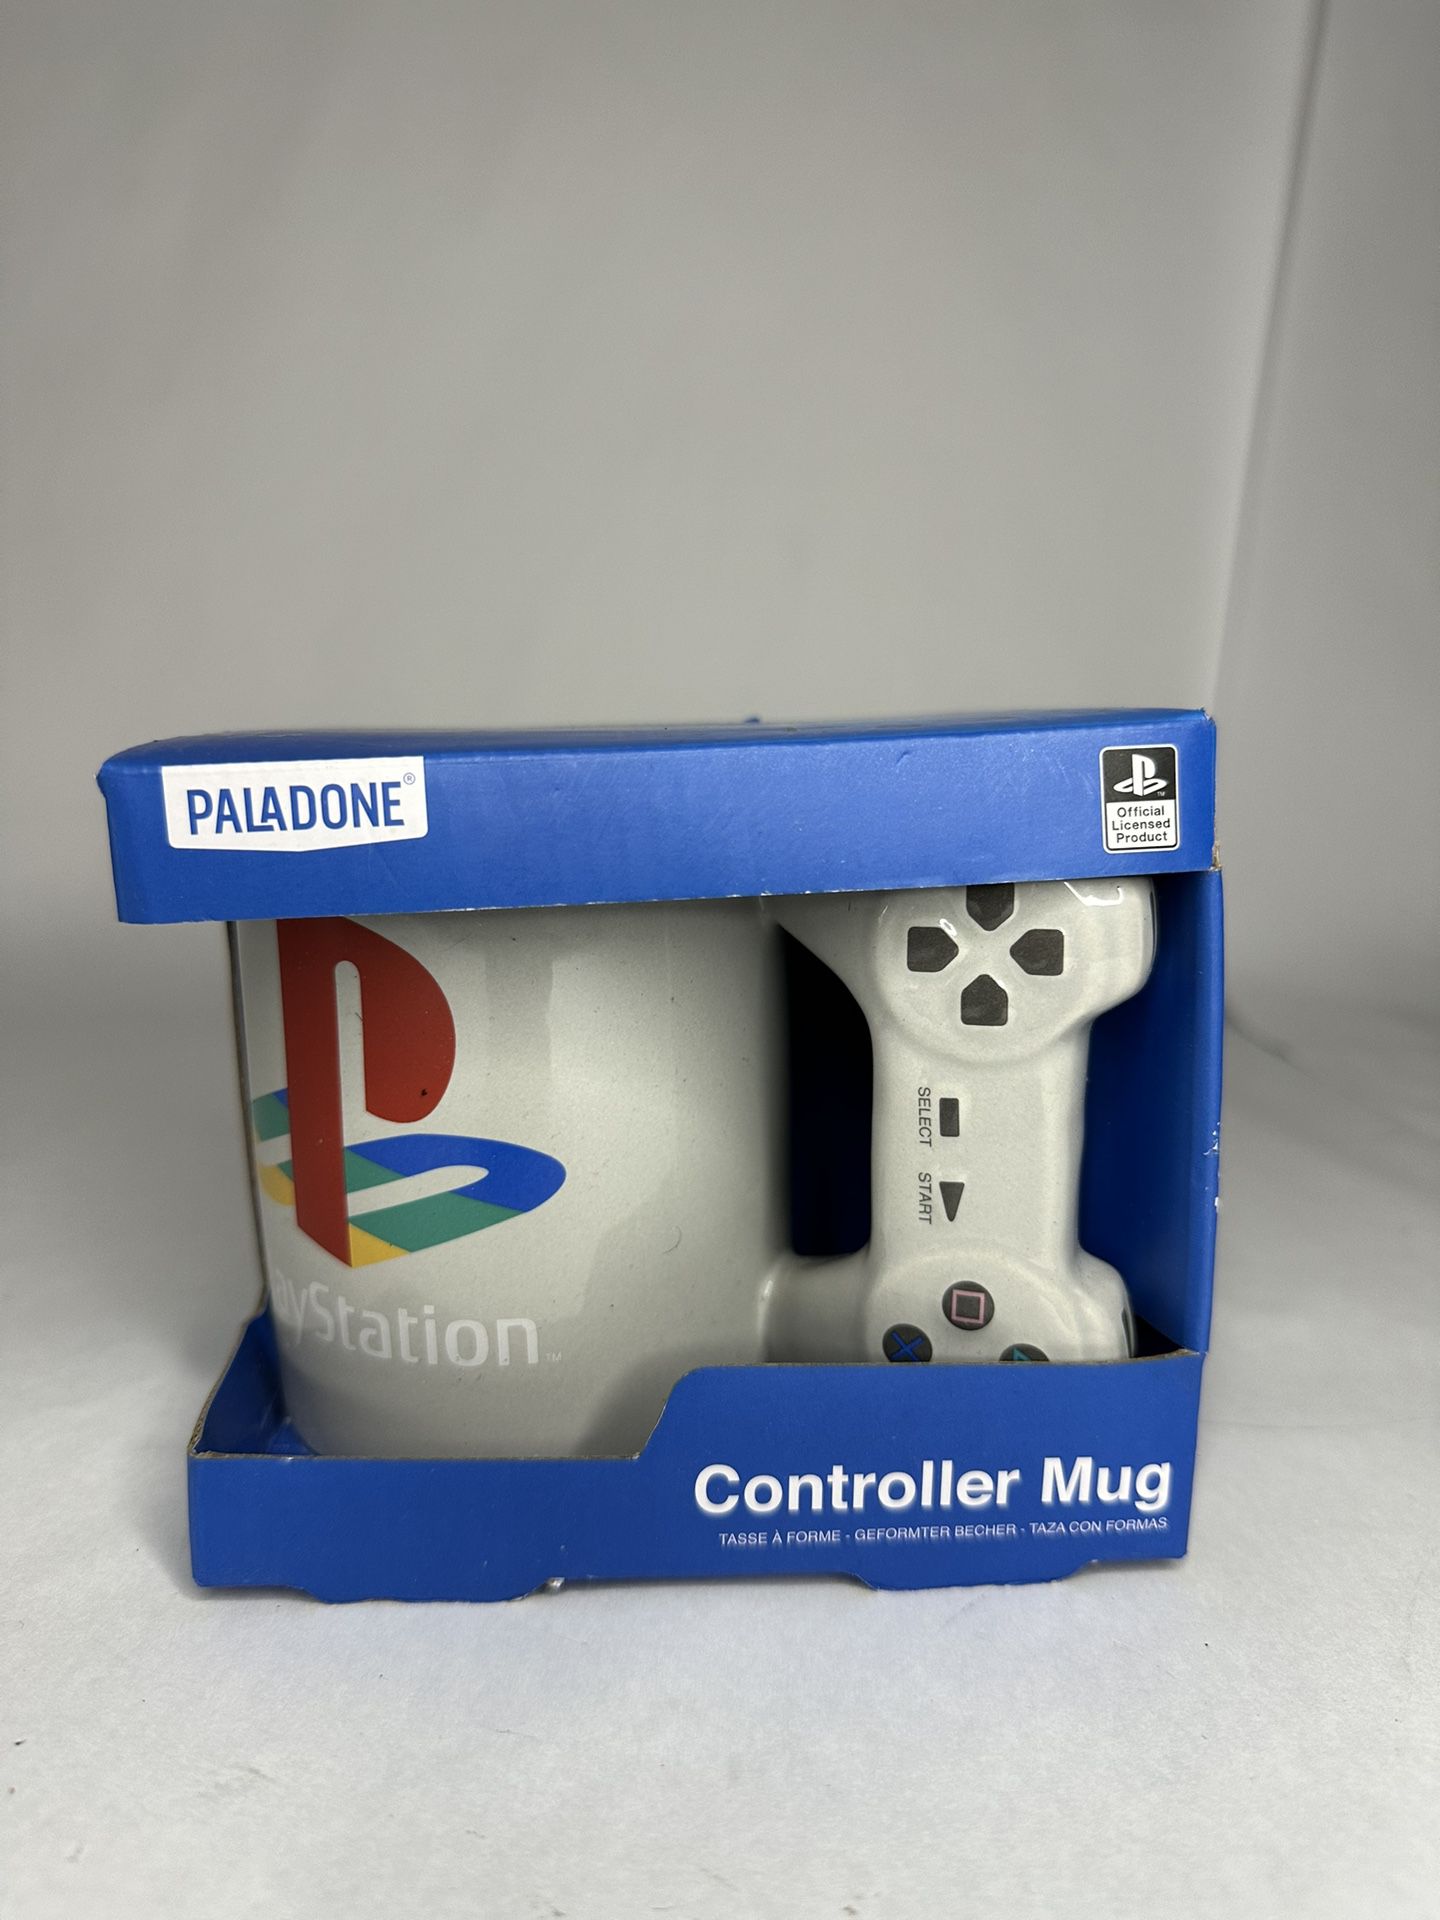 Sony PlayStation Paladone Controller Glass Coffee Mug Cup Brand New In Box